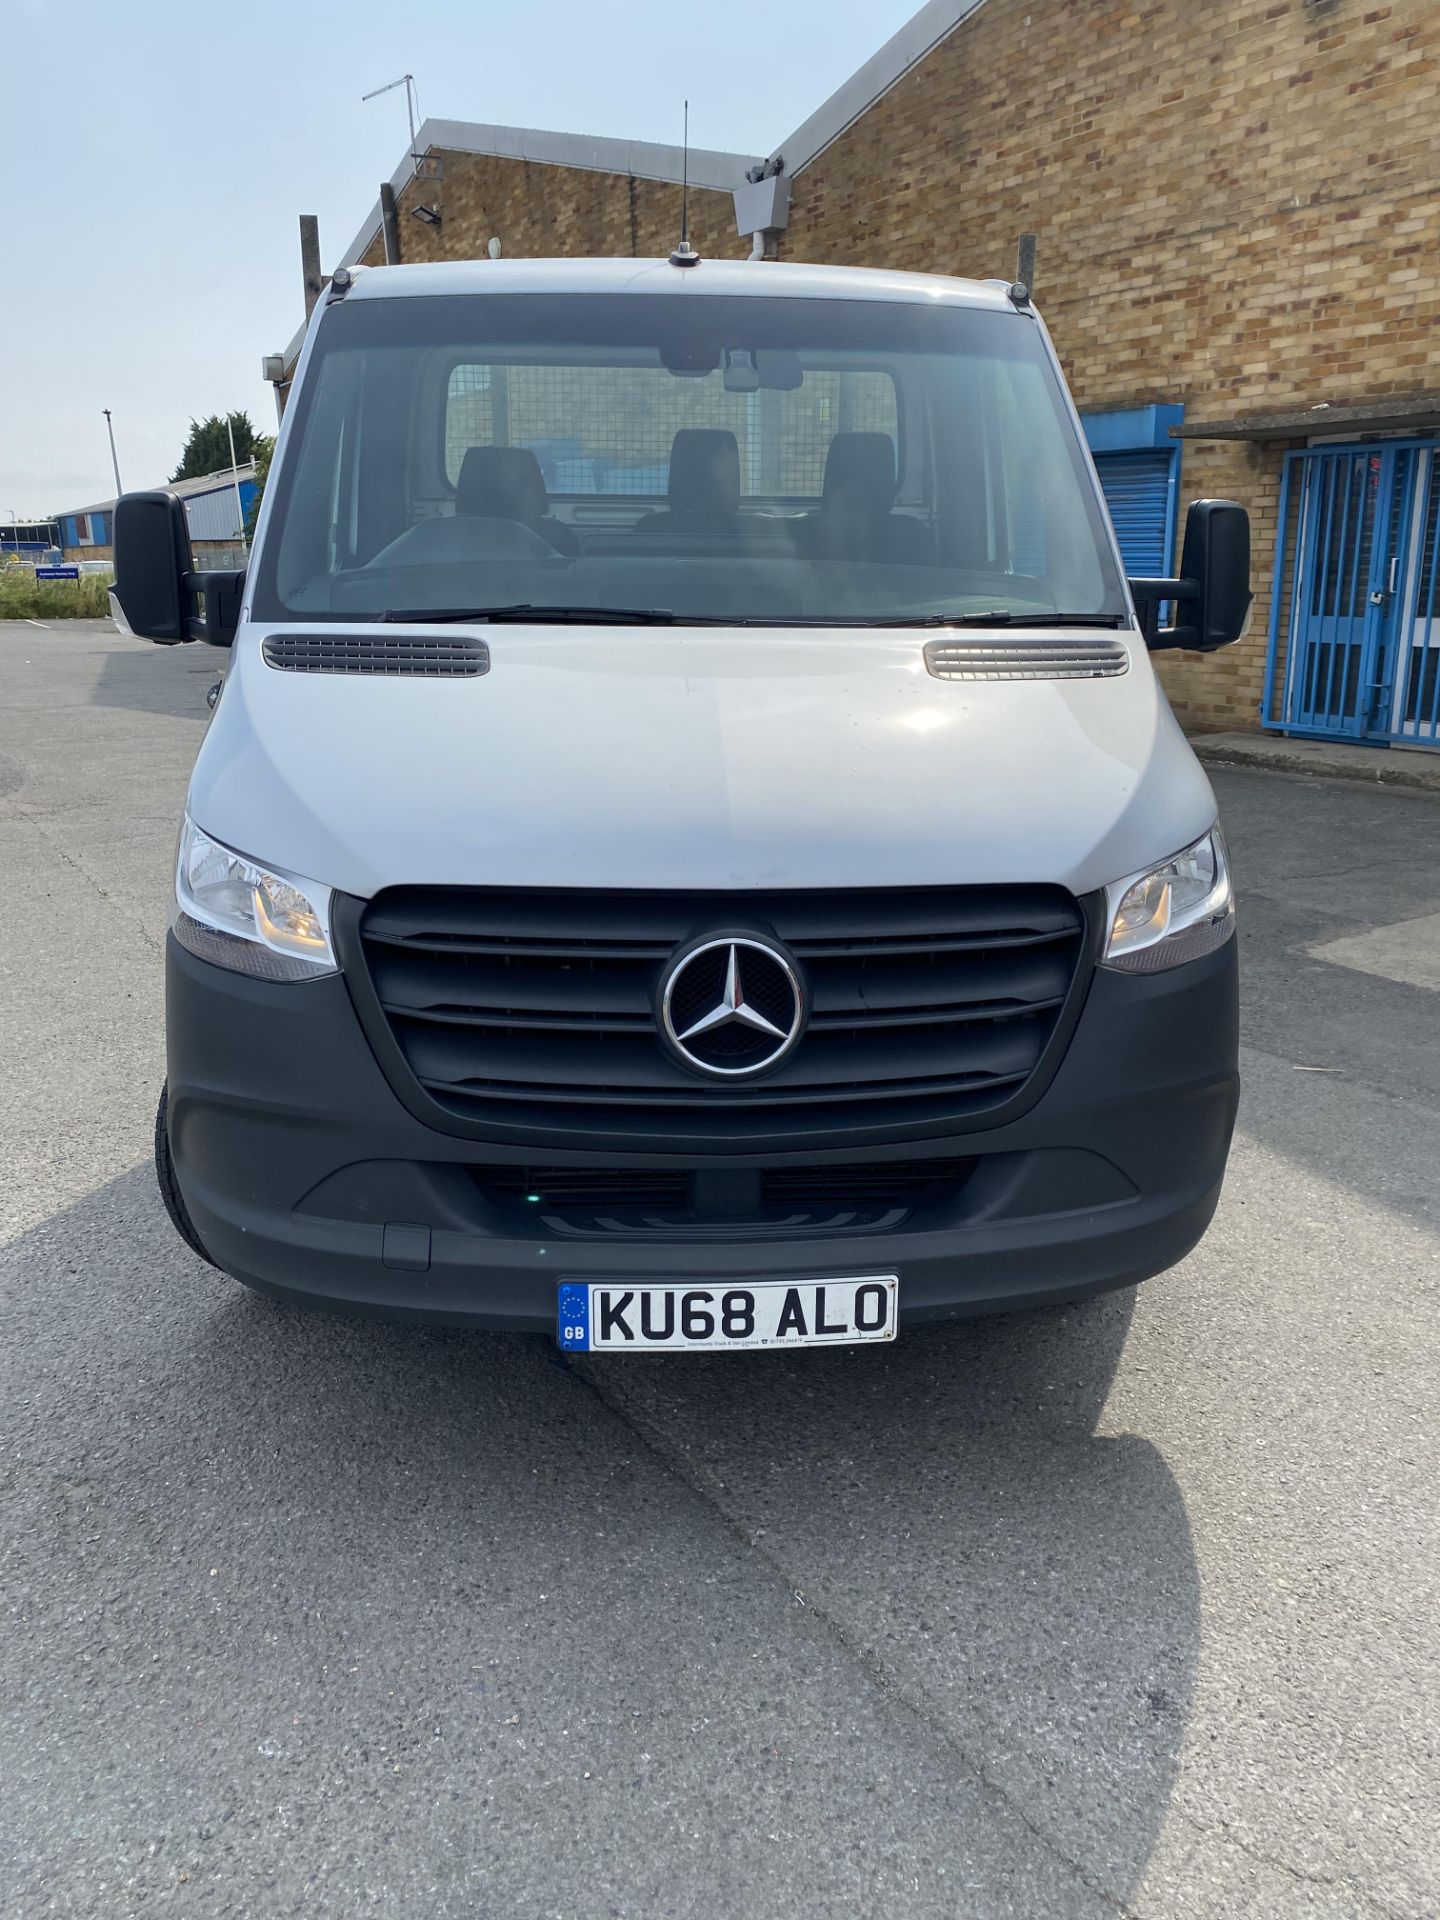 2019 MERCEDES BENZ SPRINTER 316 2.1 CDI L3 DIESEL RWD 3.5T CHASSIS CAB ALUMINIUM FLAT EXTRA LONG - Image 2 of 30